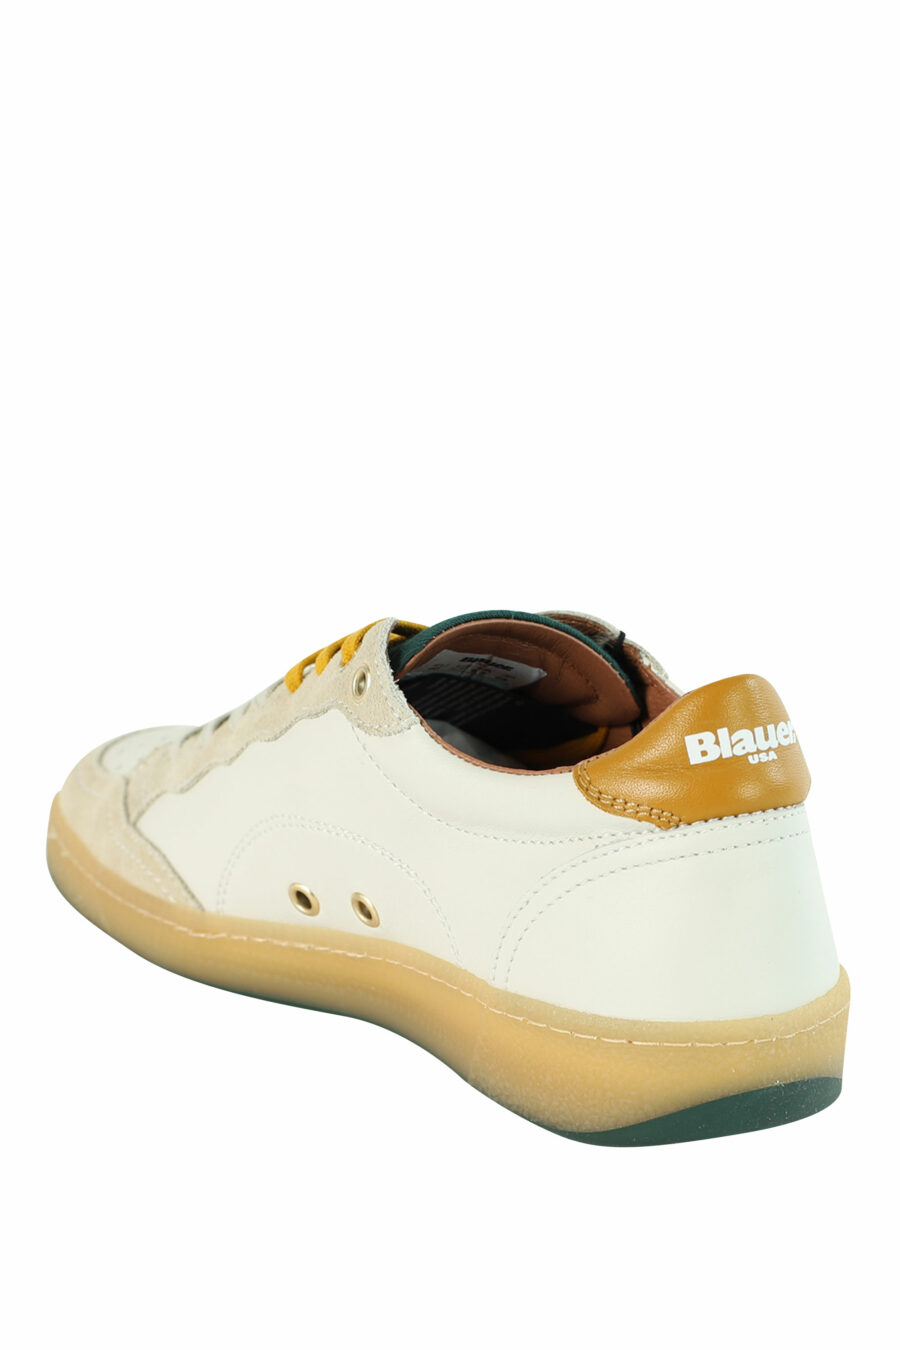 White "MURRAY" trainers with green and yellow details - 8058156497566 4